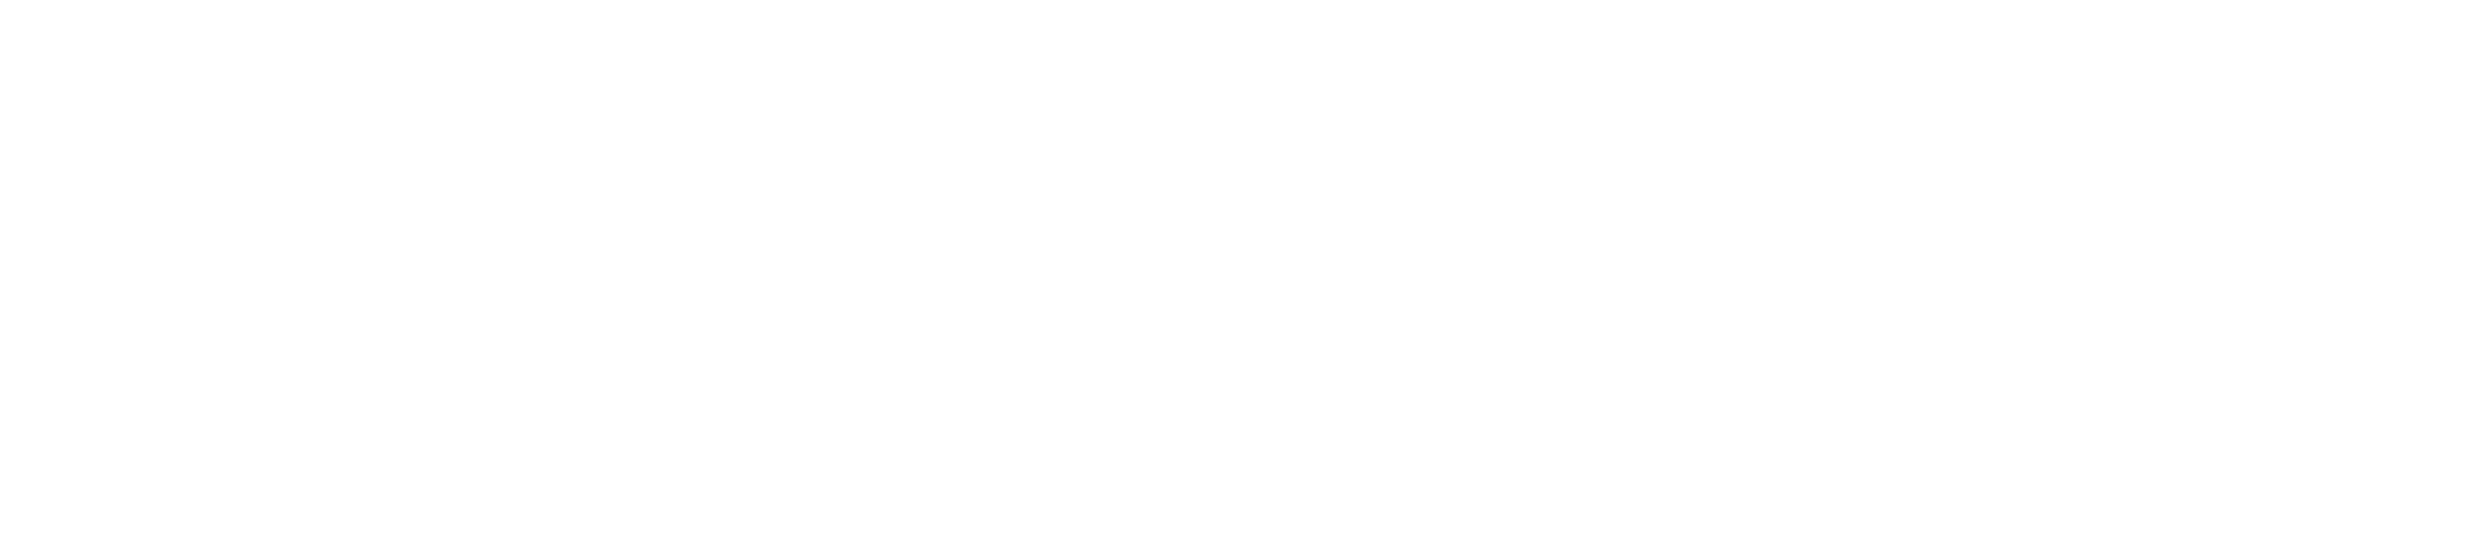 A black and white logo of the word " bel ".